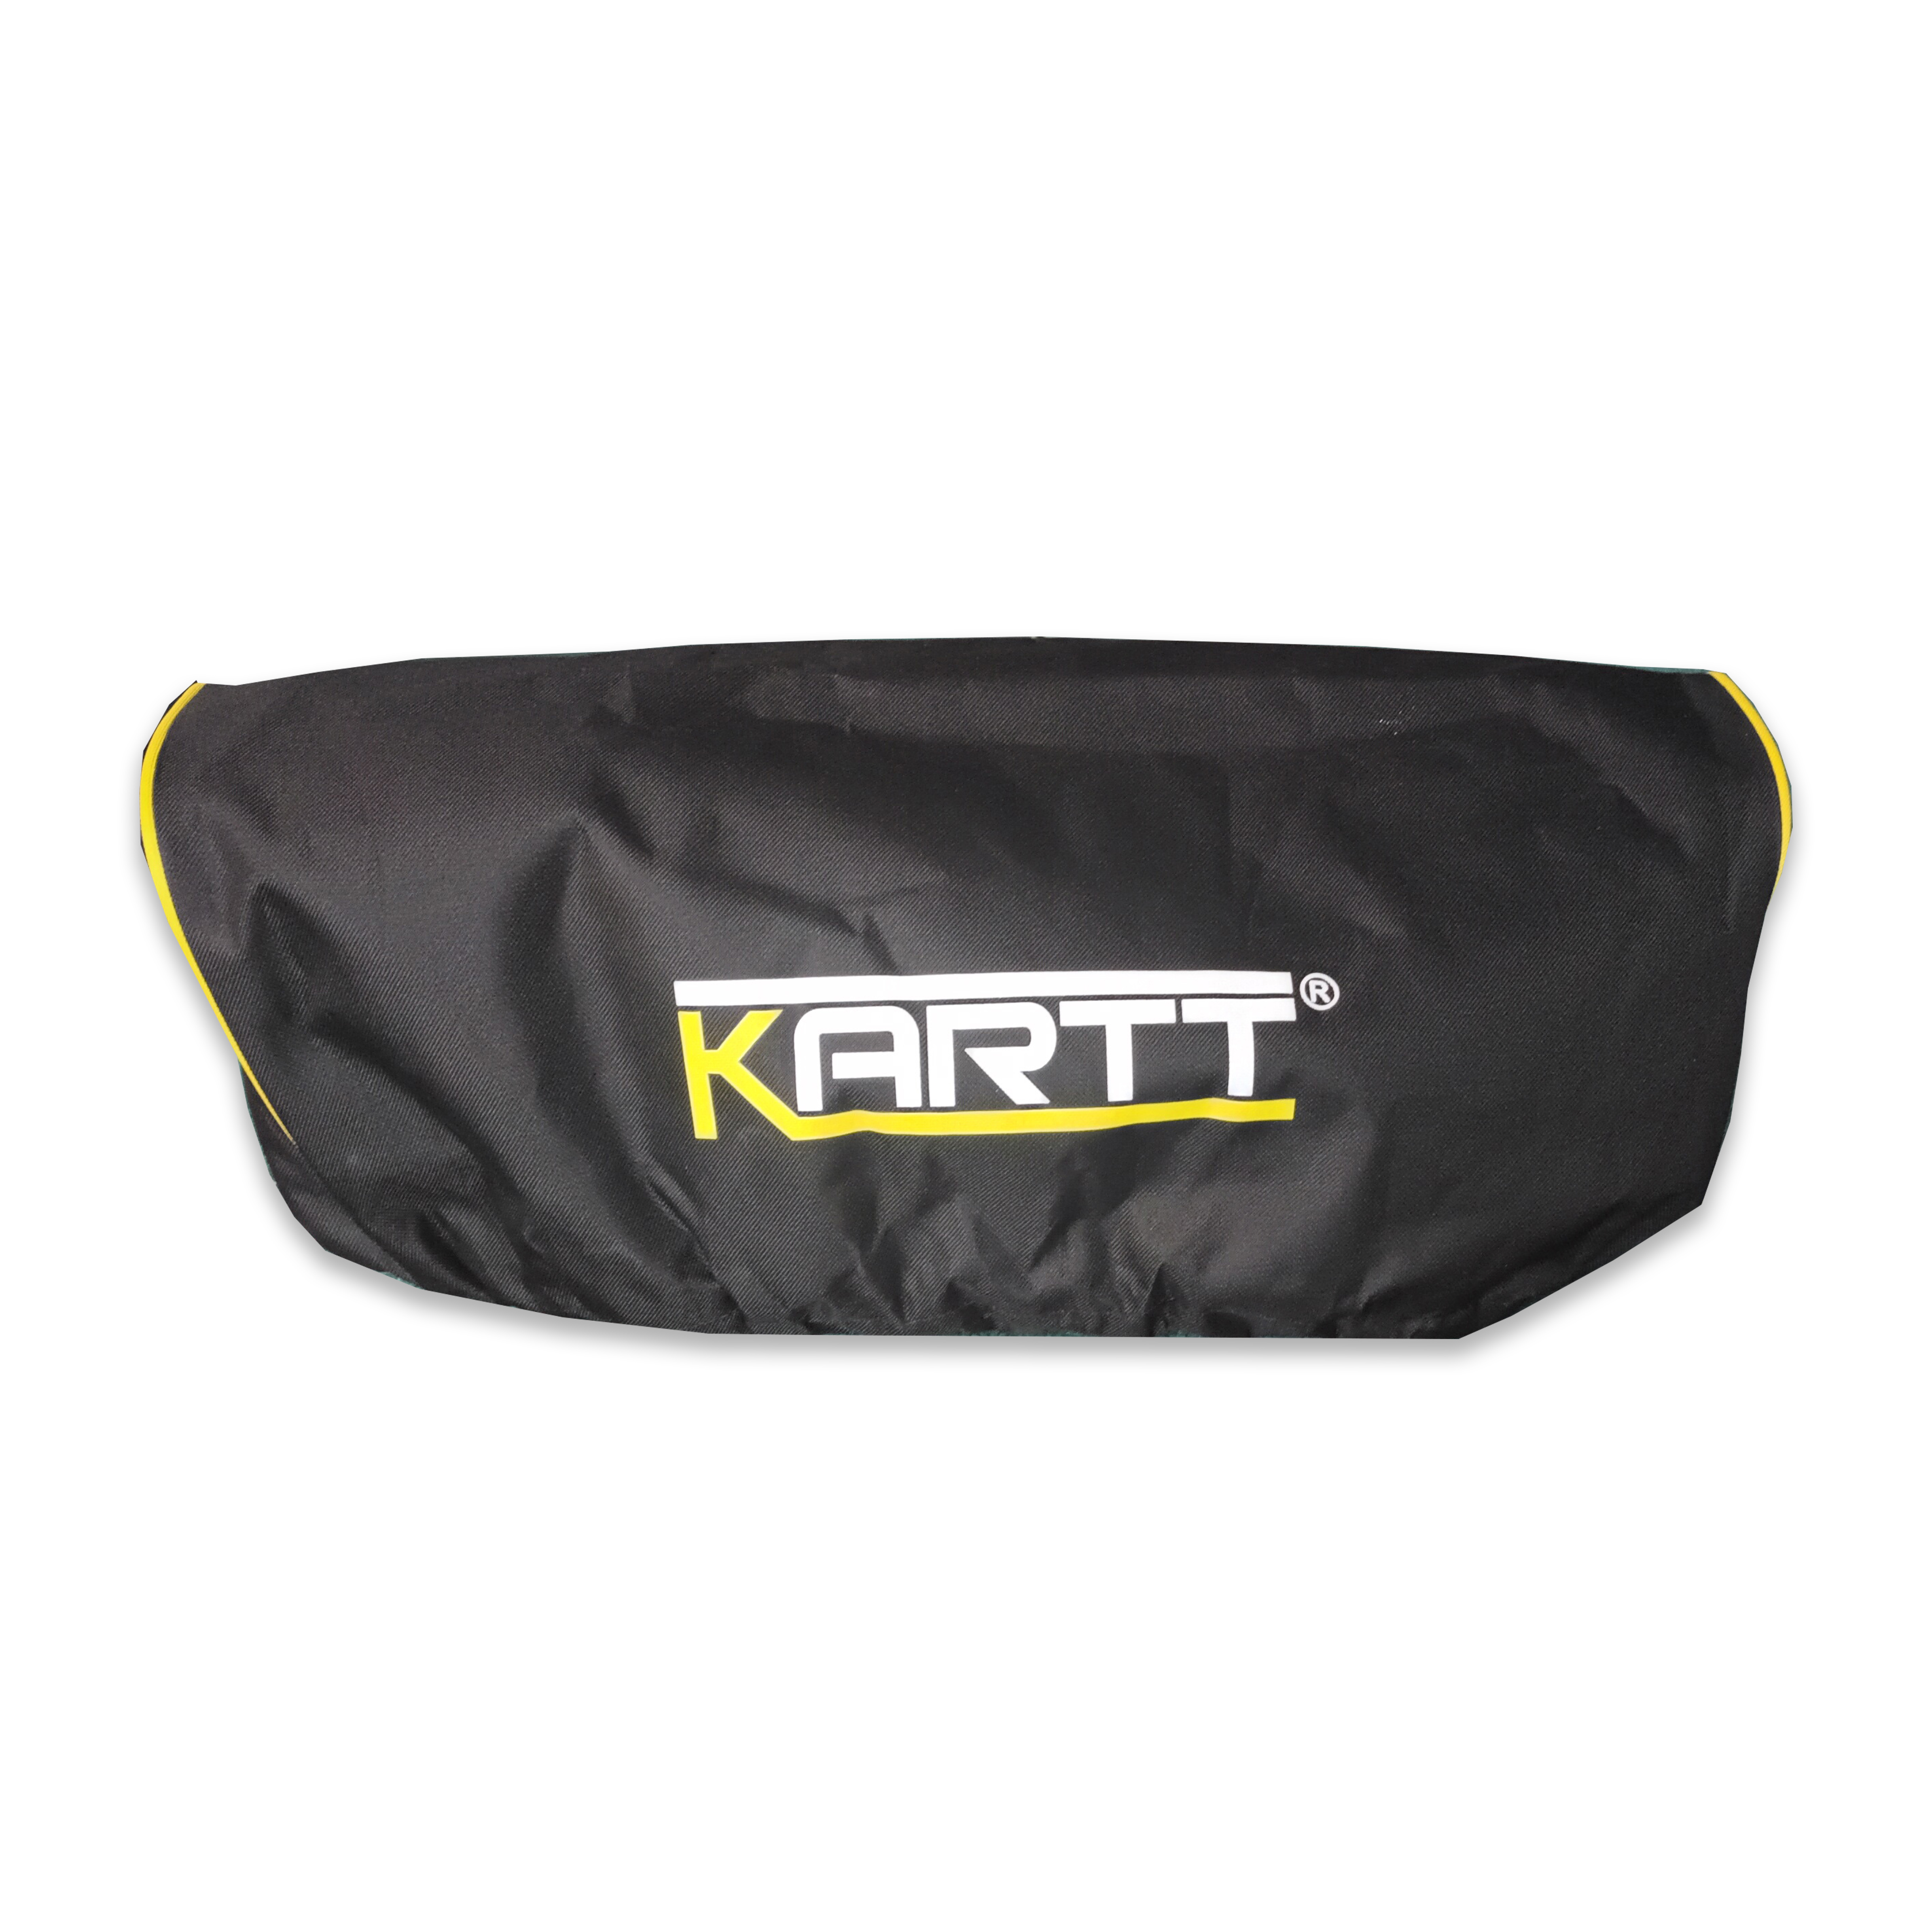 KARTT electric winch cover up to 4500 lb winches